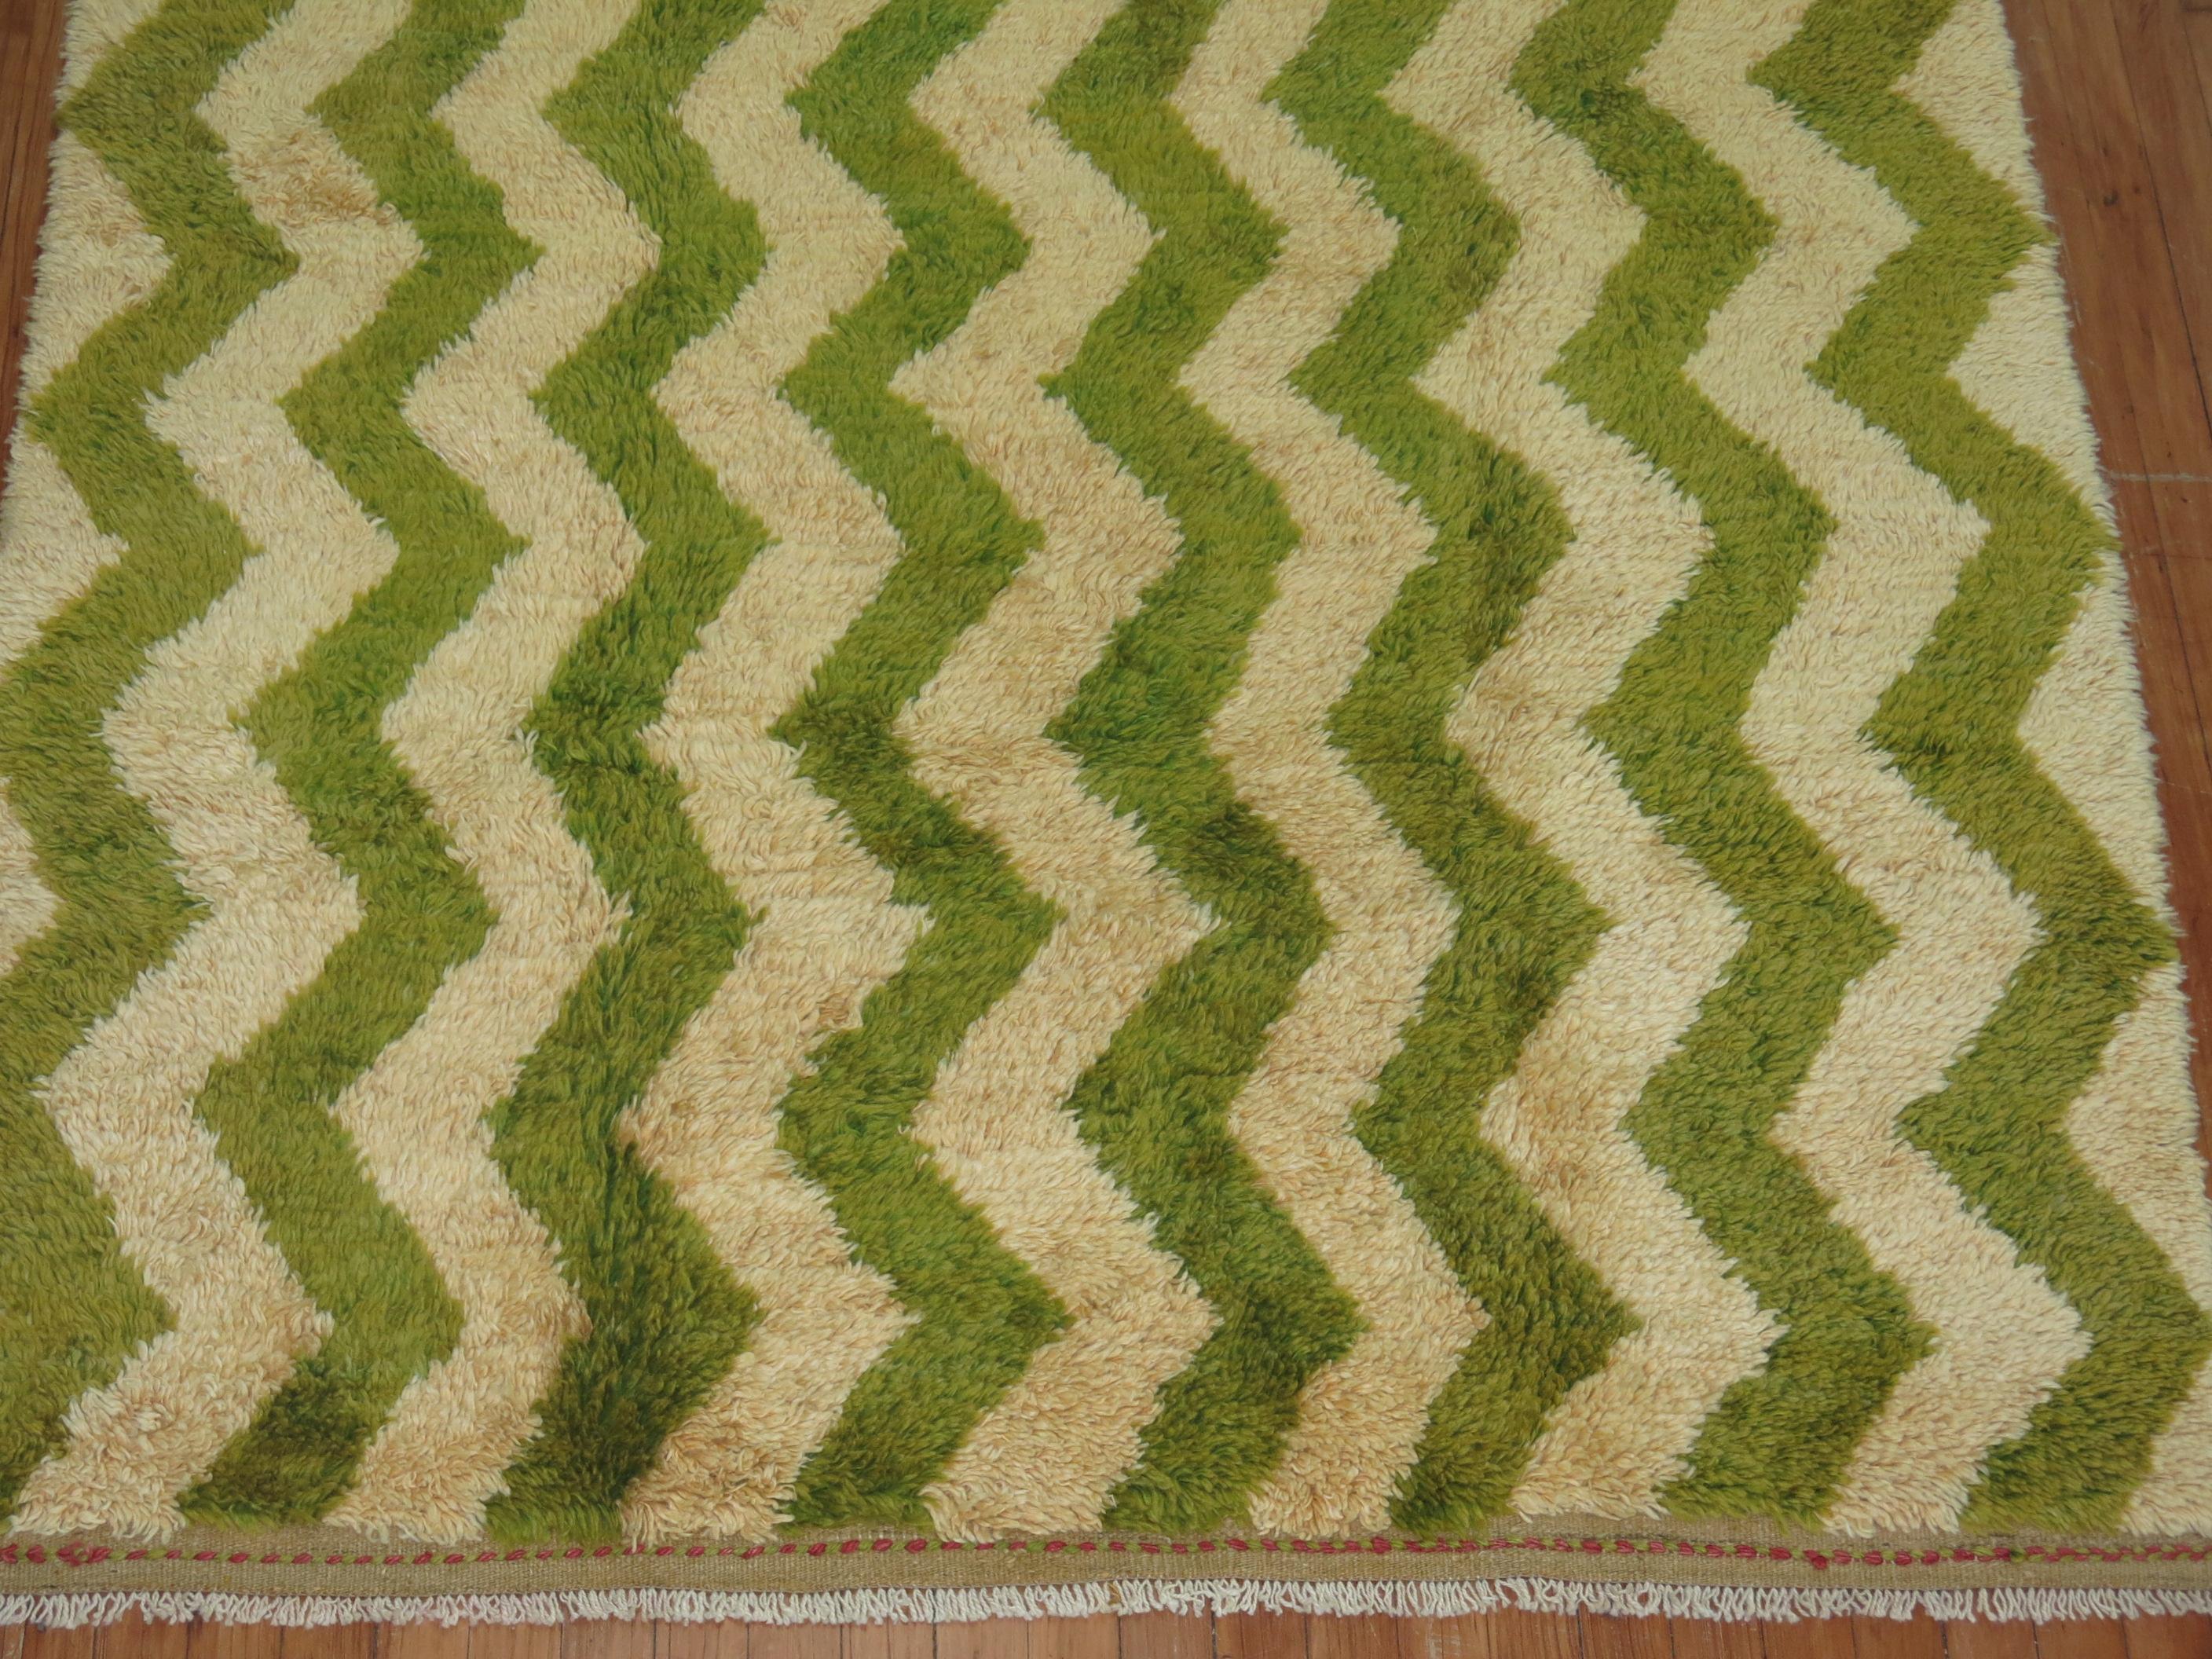 Green and bone color mid-20th century Turkish shag rug.

Measures: 5'1'' x 7'.